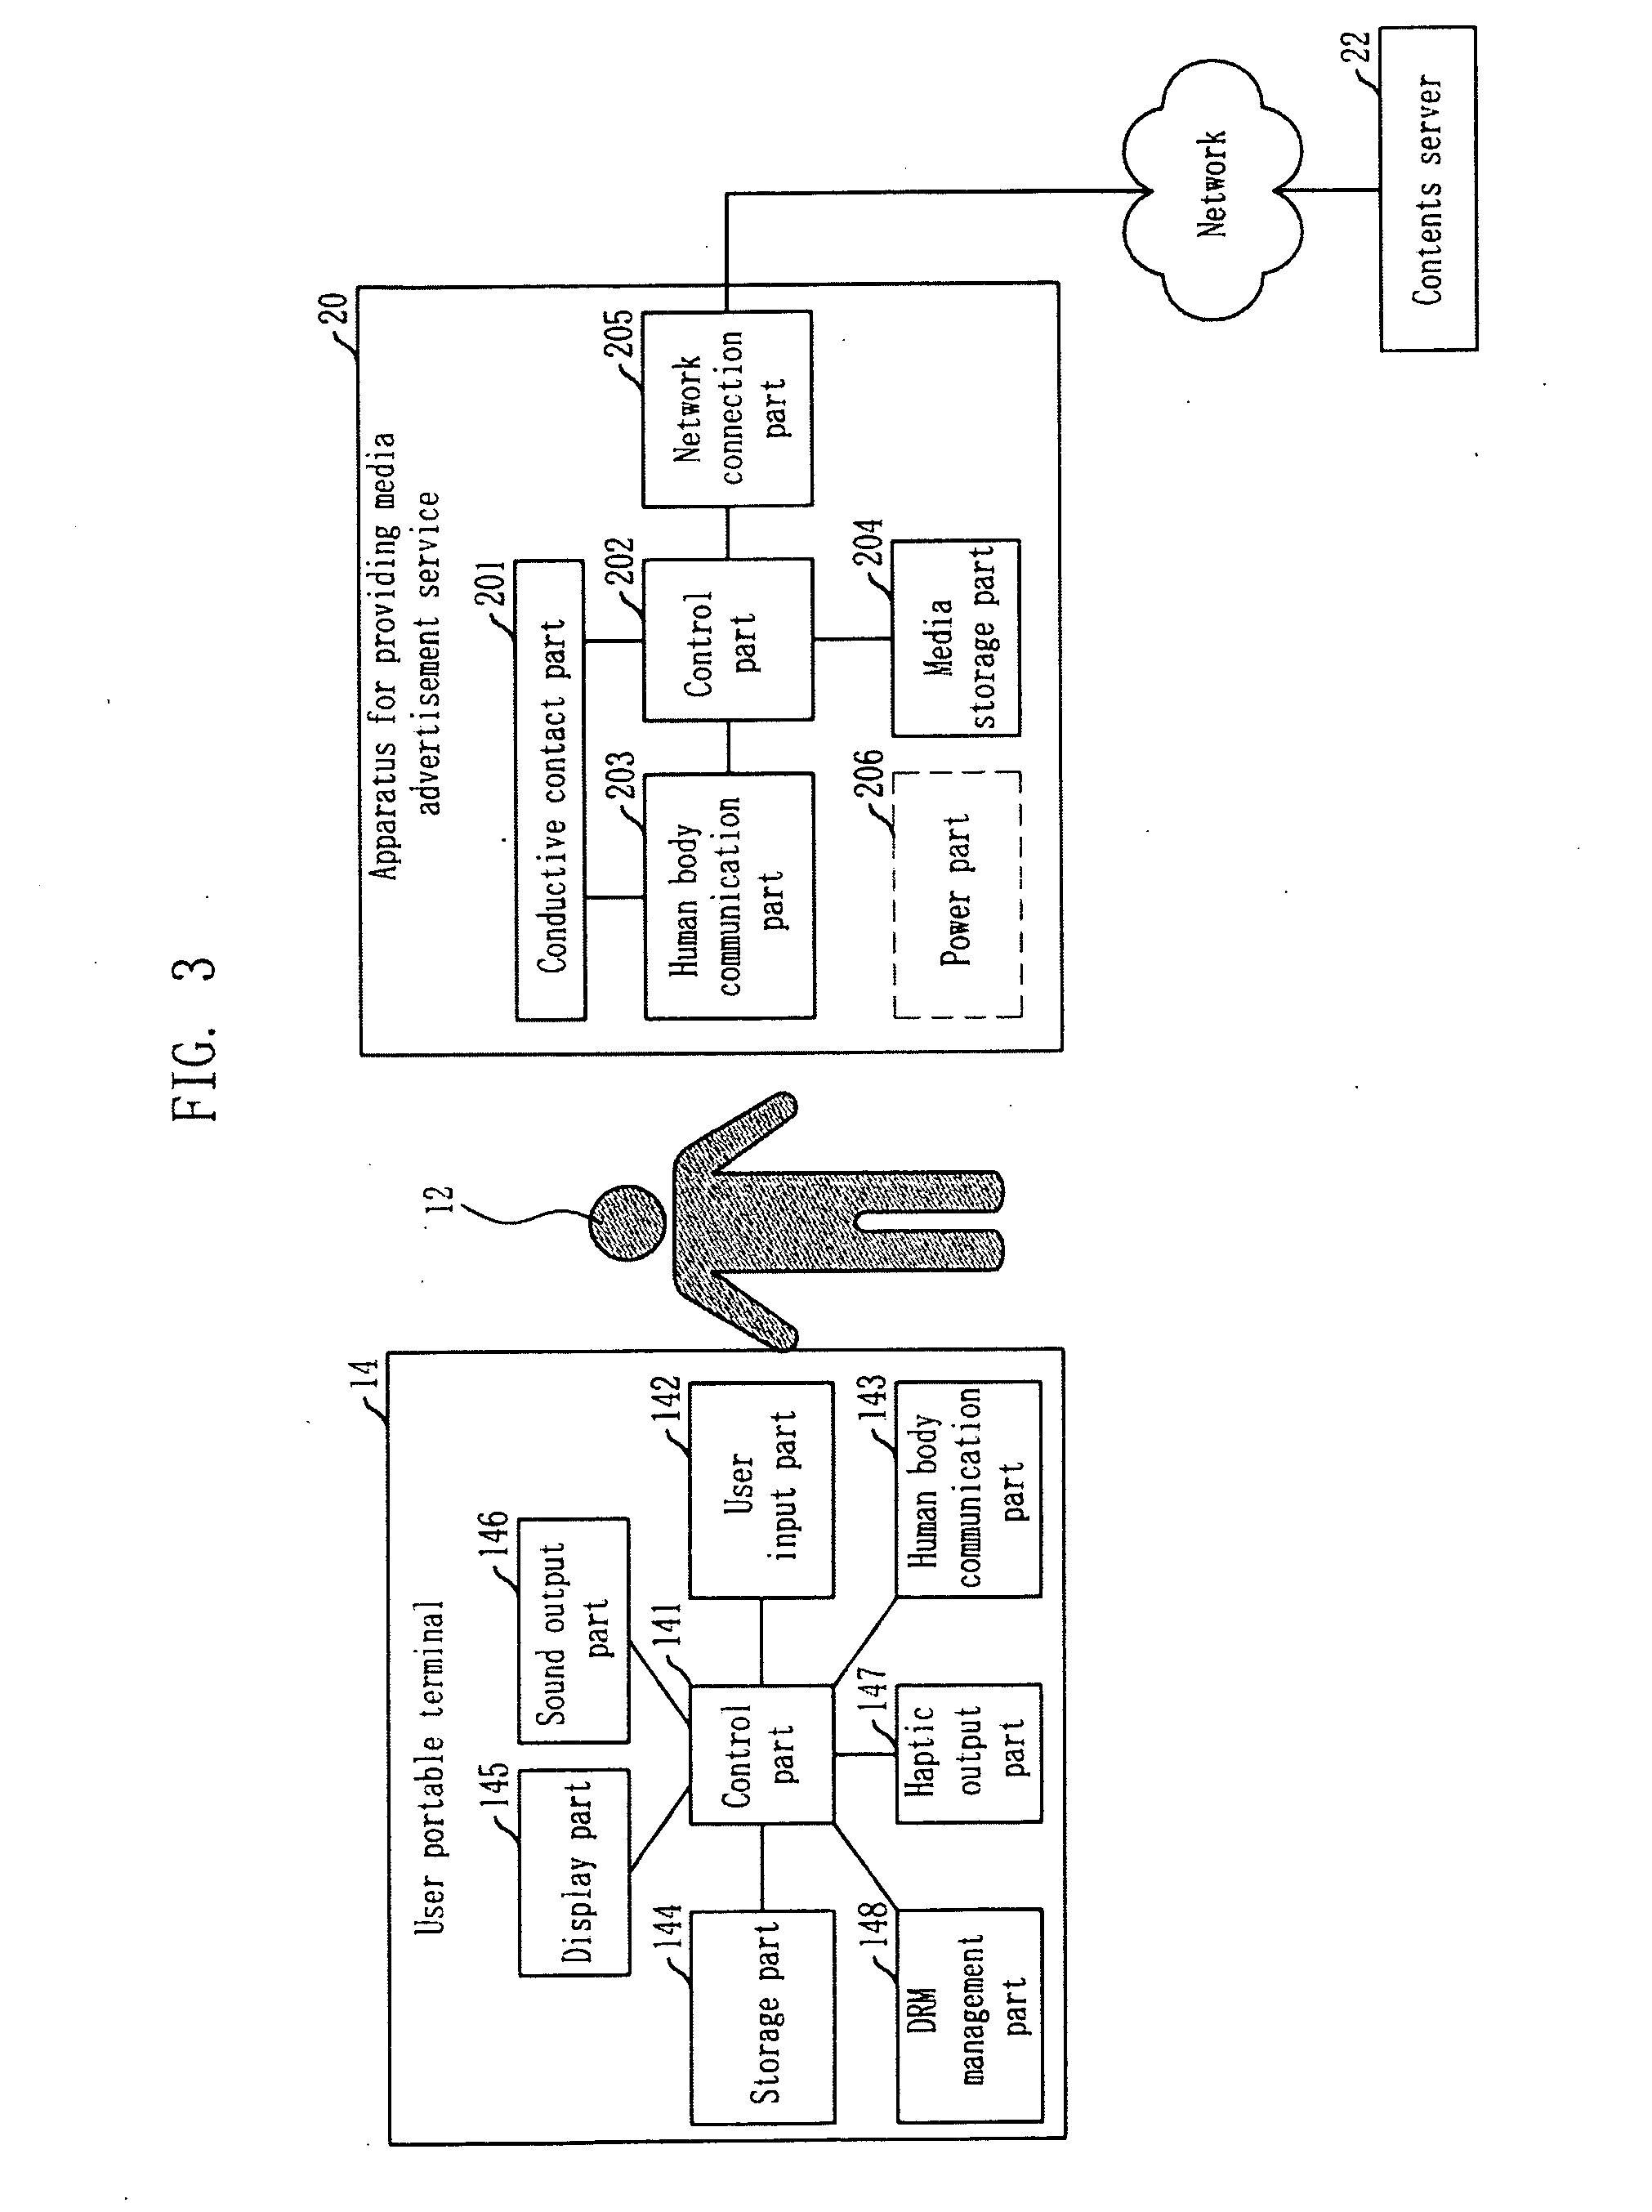 Apparatus and method for providing media advertisement service using human body communication